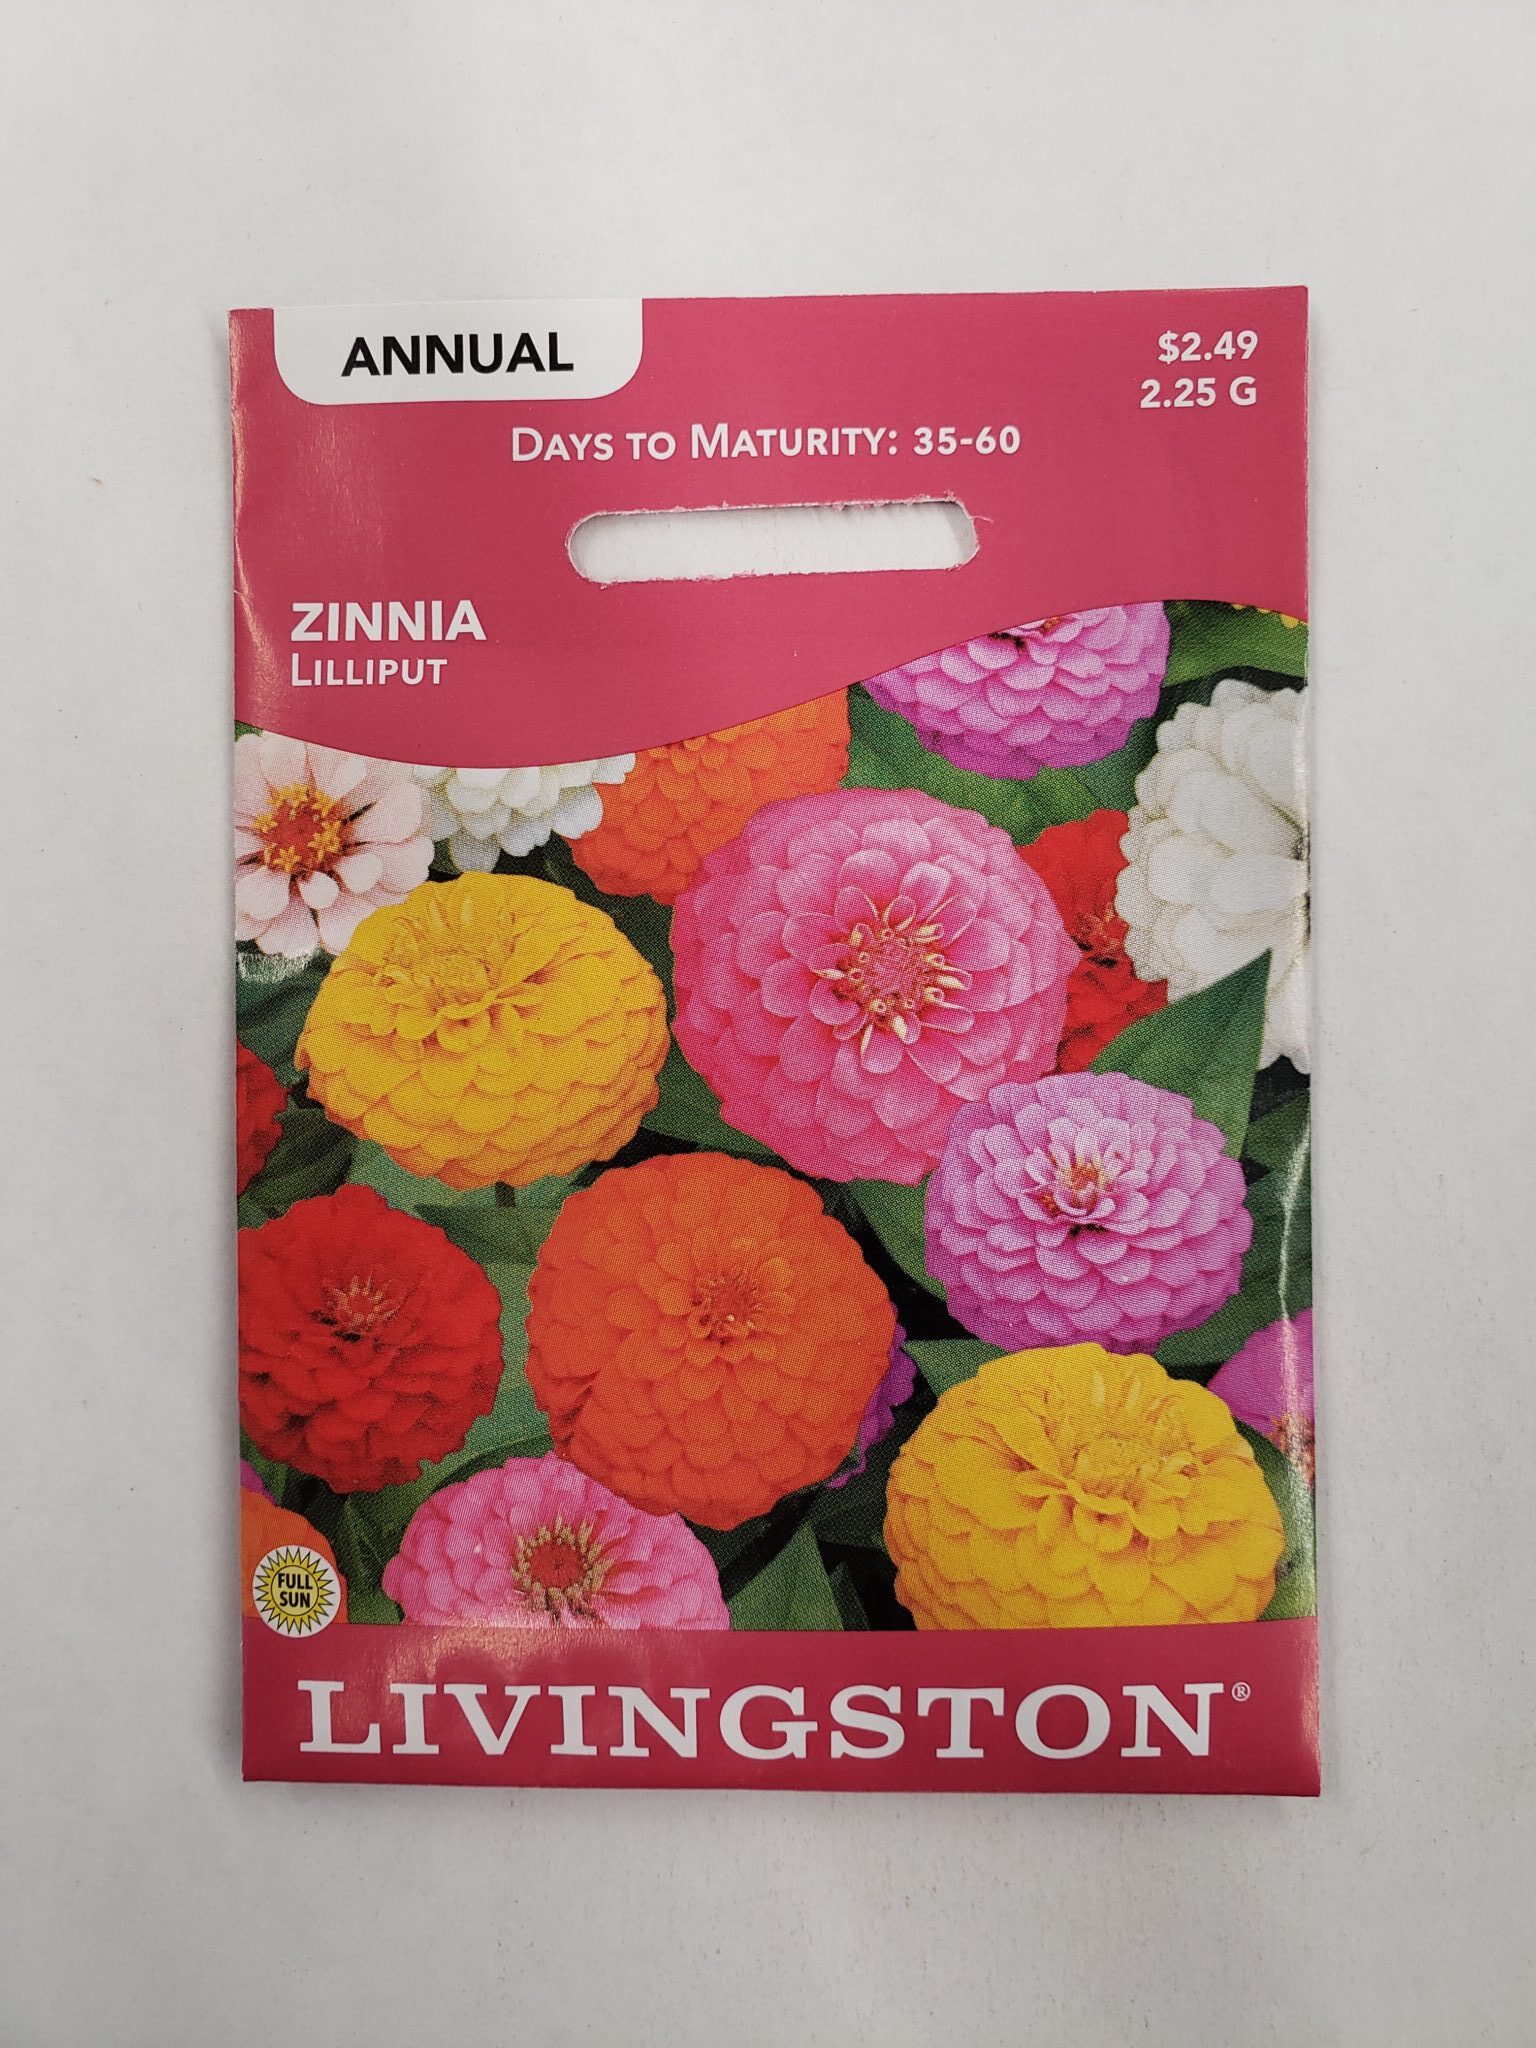 Y1580 Lilliput Zinnia Seed, Summer to Fall Bloom, Orange/Pink/Red/White/Yellow Bloom, 1.5 g Pack